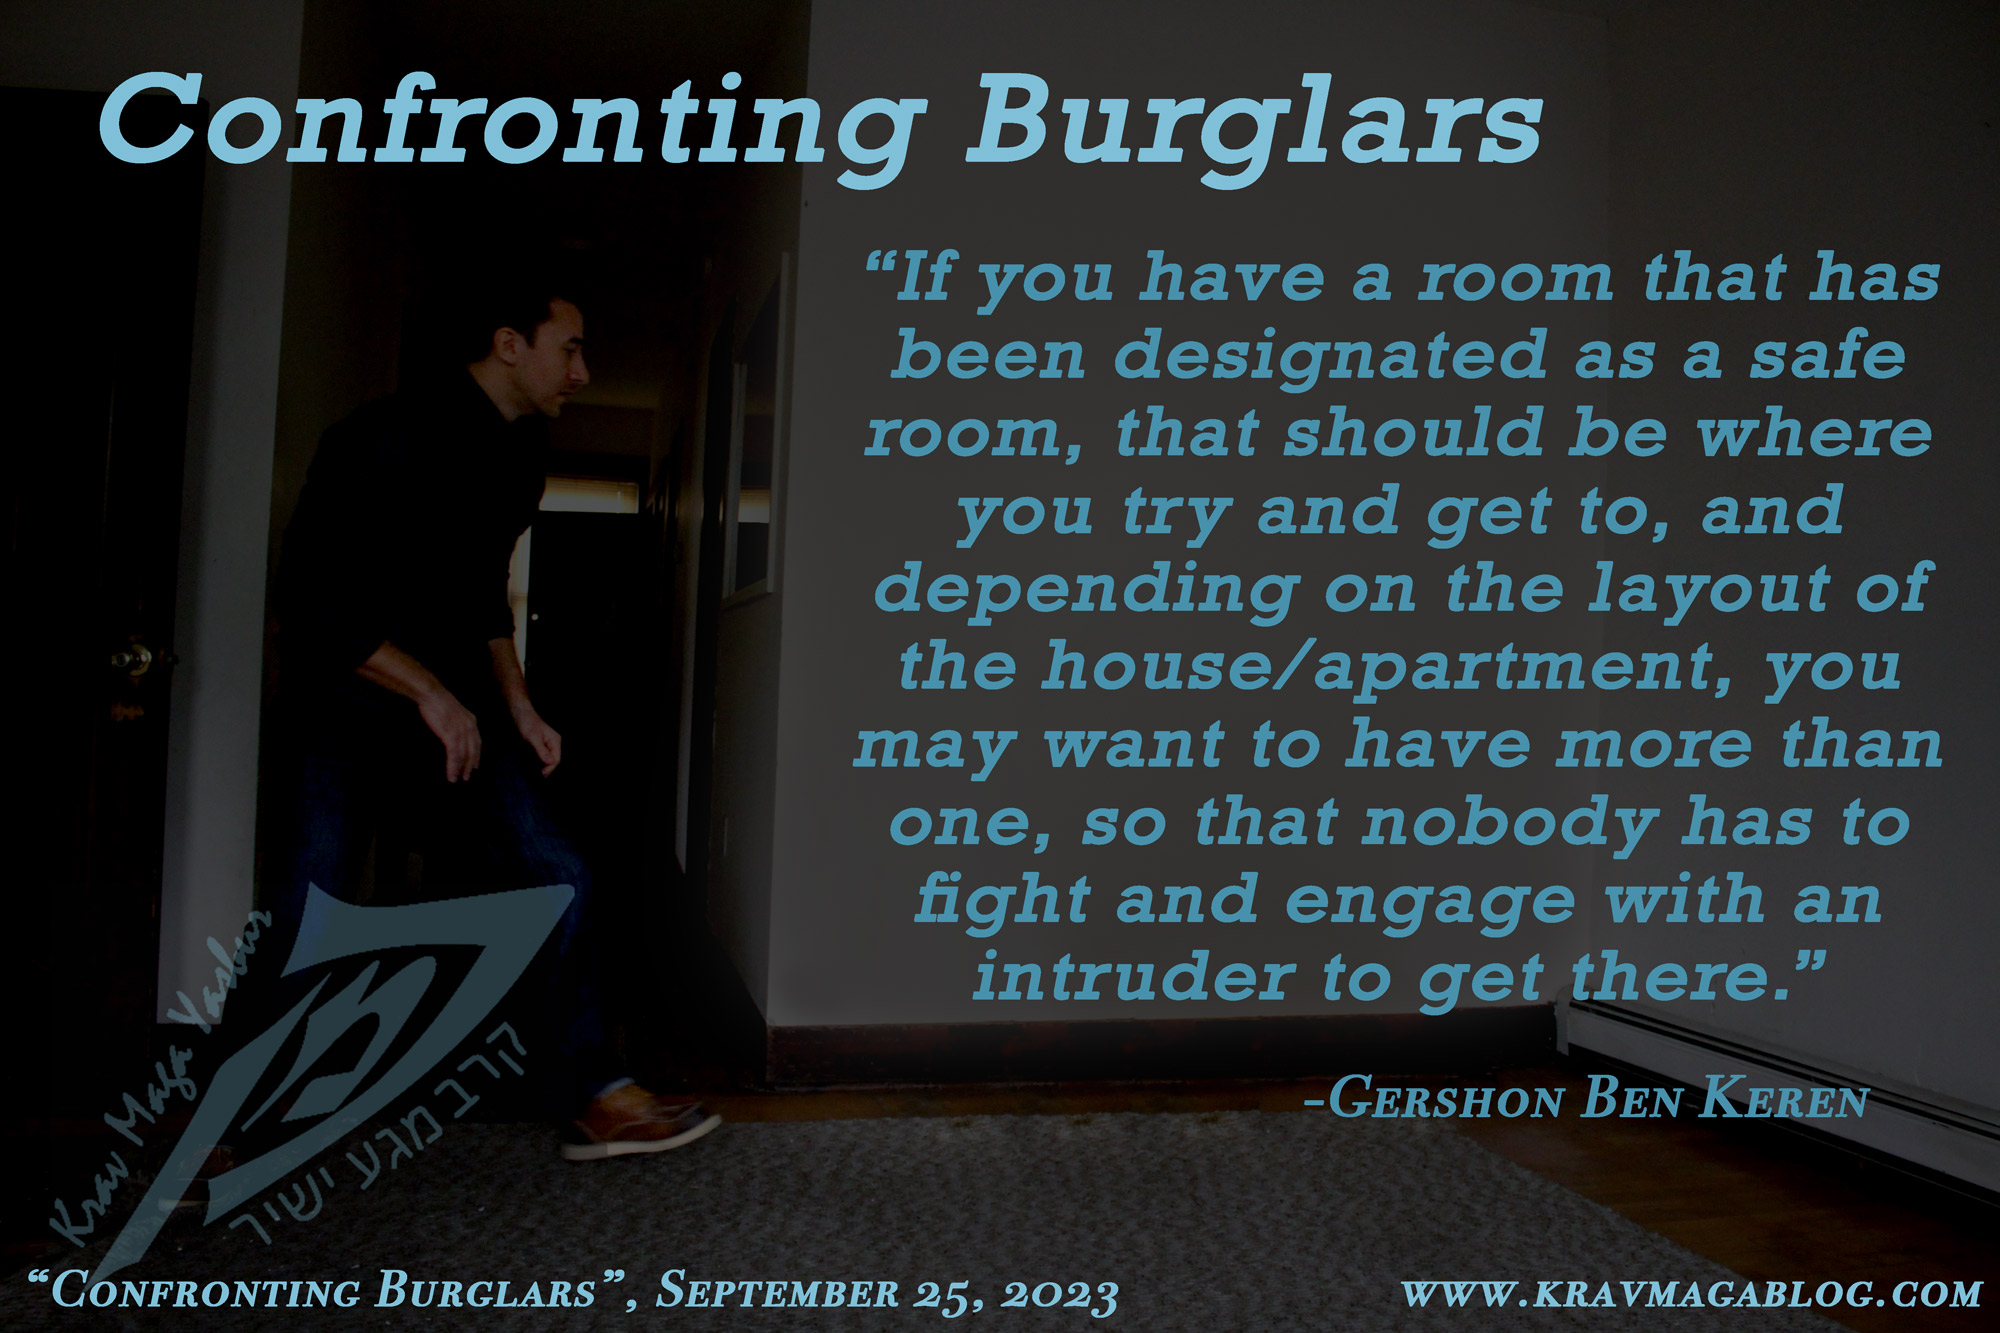 Blog About Confronting Burglars